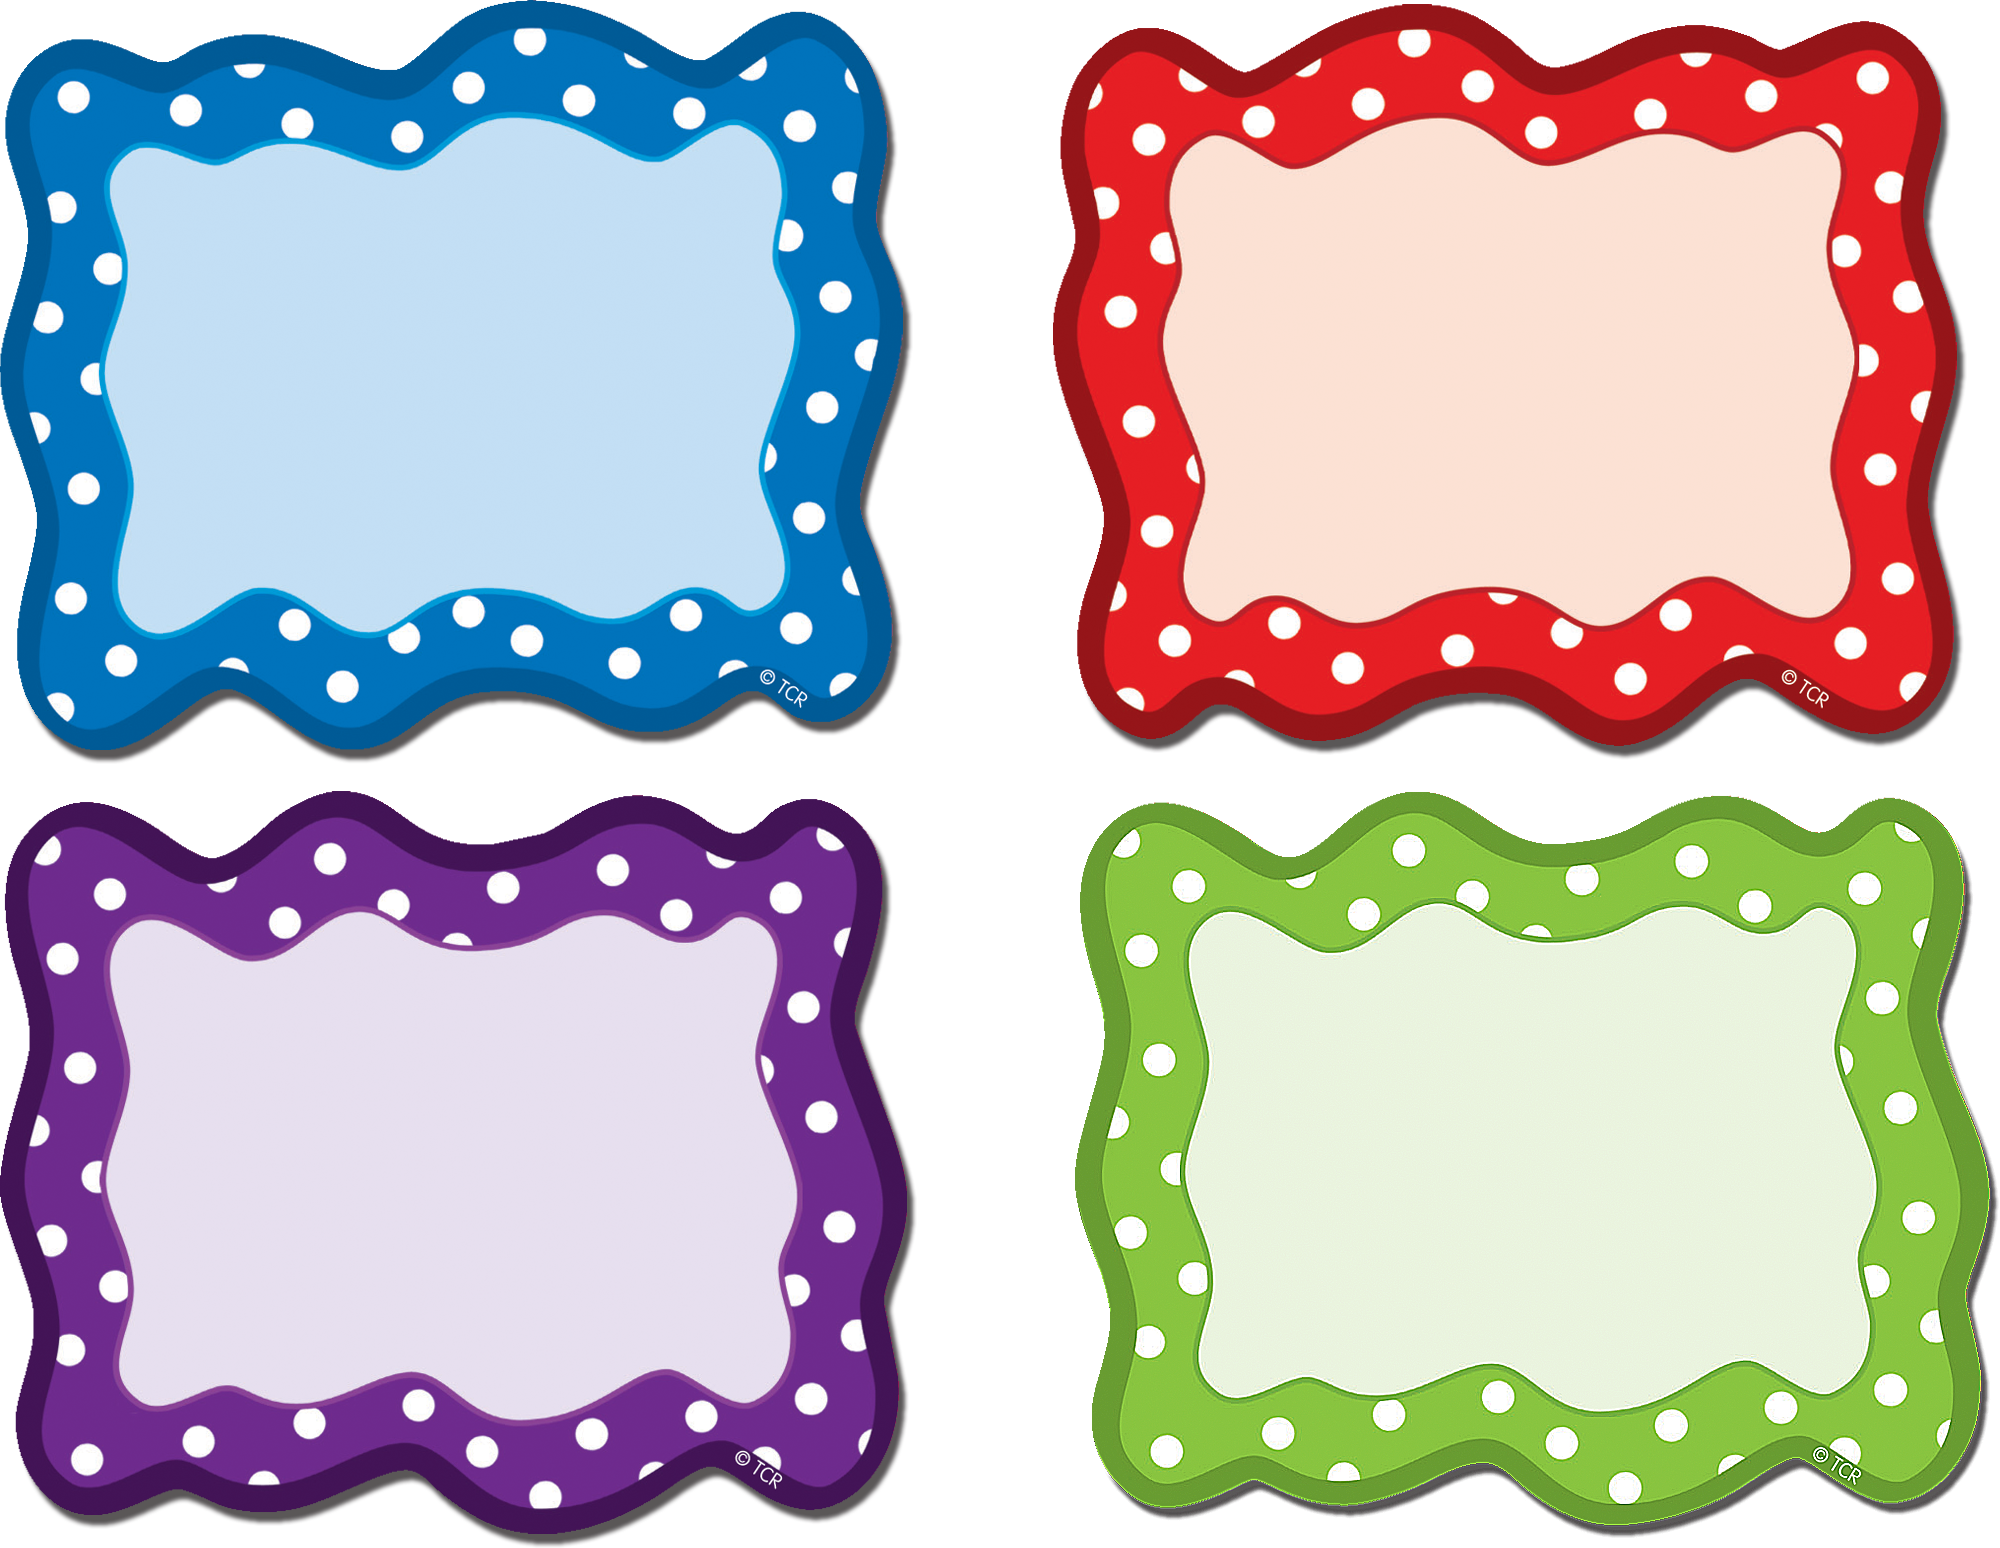 Teacher Created Resources Polka Dot Buckets Accents, 6 Inches, Pack of 30 